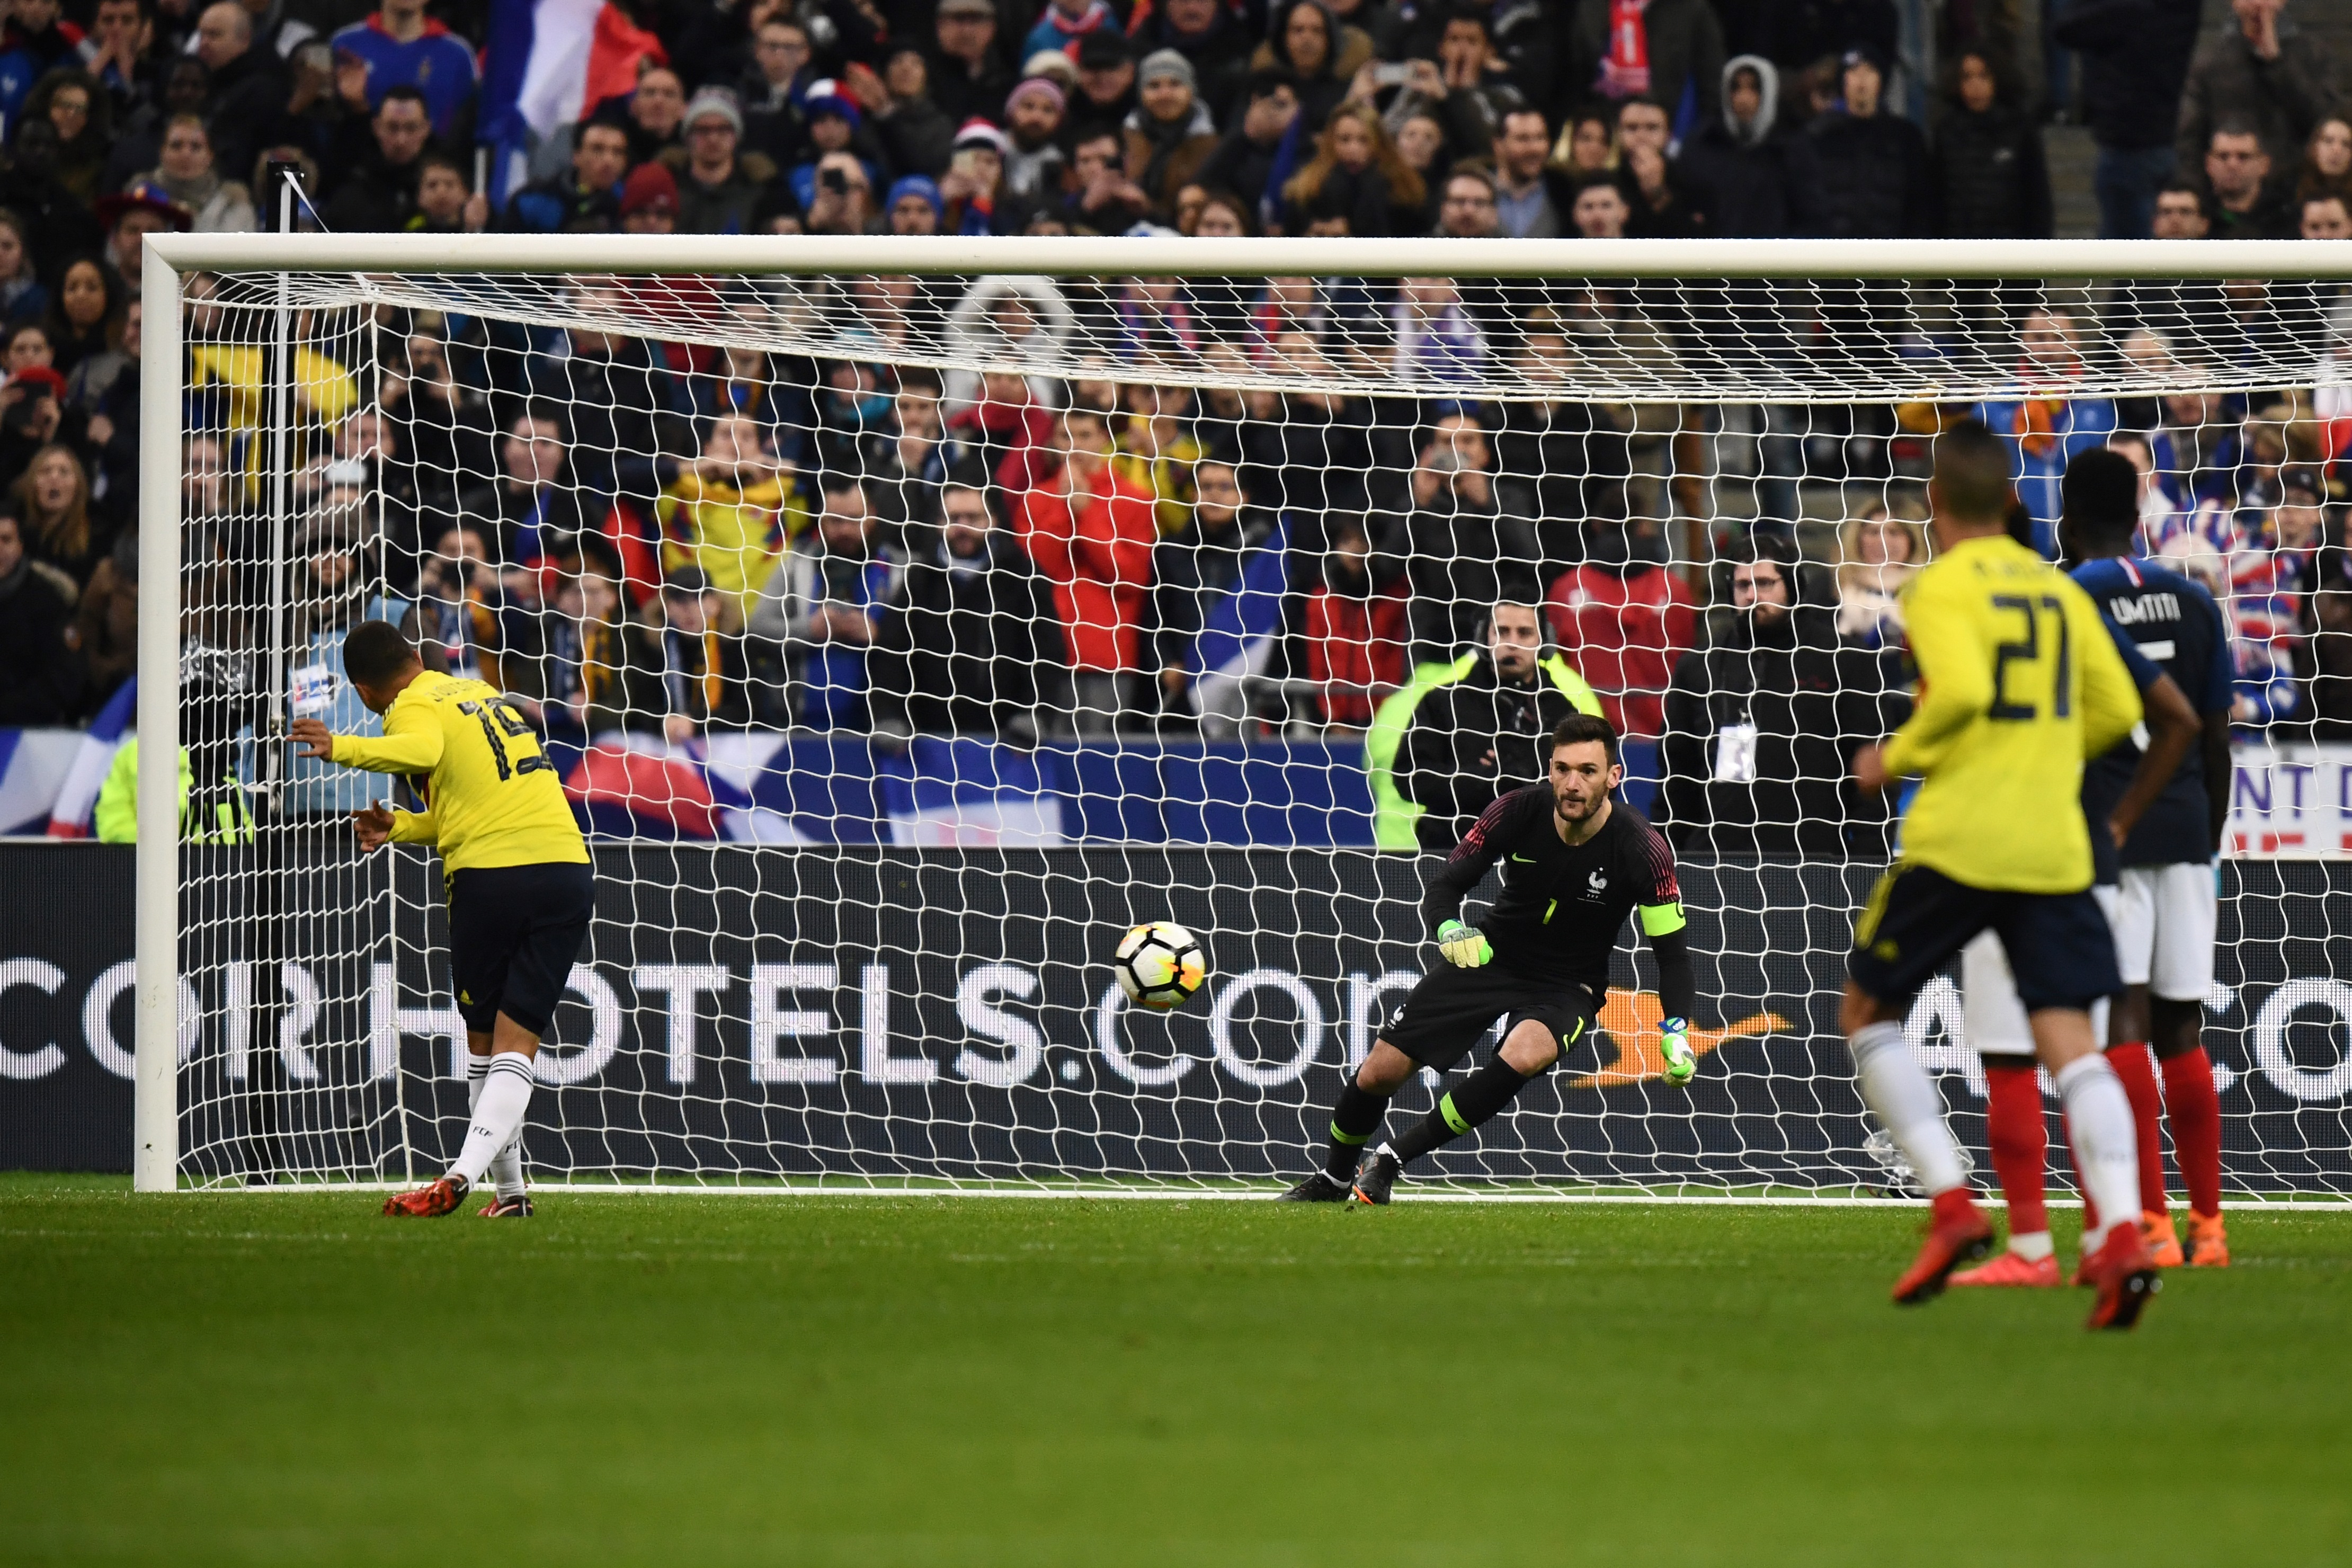 Colombia's midfielder Juan Fernando Quintero shoots and scores during the friendly football match between France and Colombia at the Stade de France, in Saint-Denis, on the outskirts of Paris, on March 23, 2018. / AFP PHOTO / FRANCK FIFE        (Photo credit should read FRANCK FIFE/AFP/Getty Images)